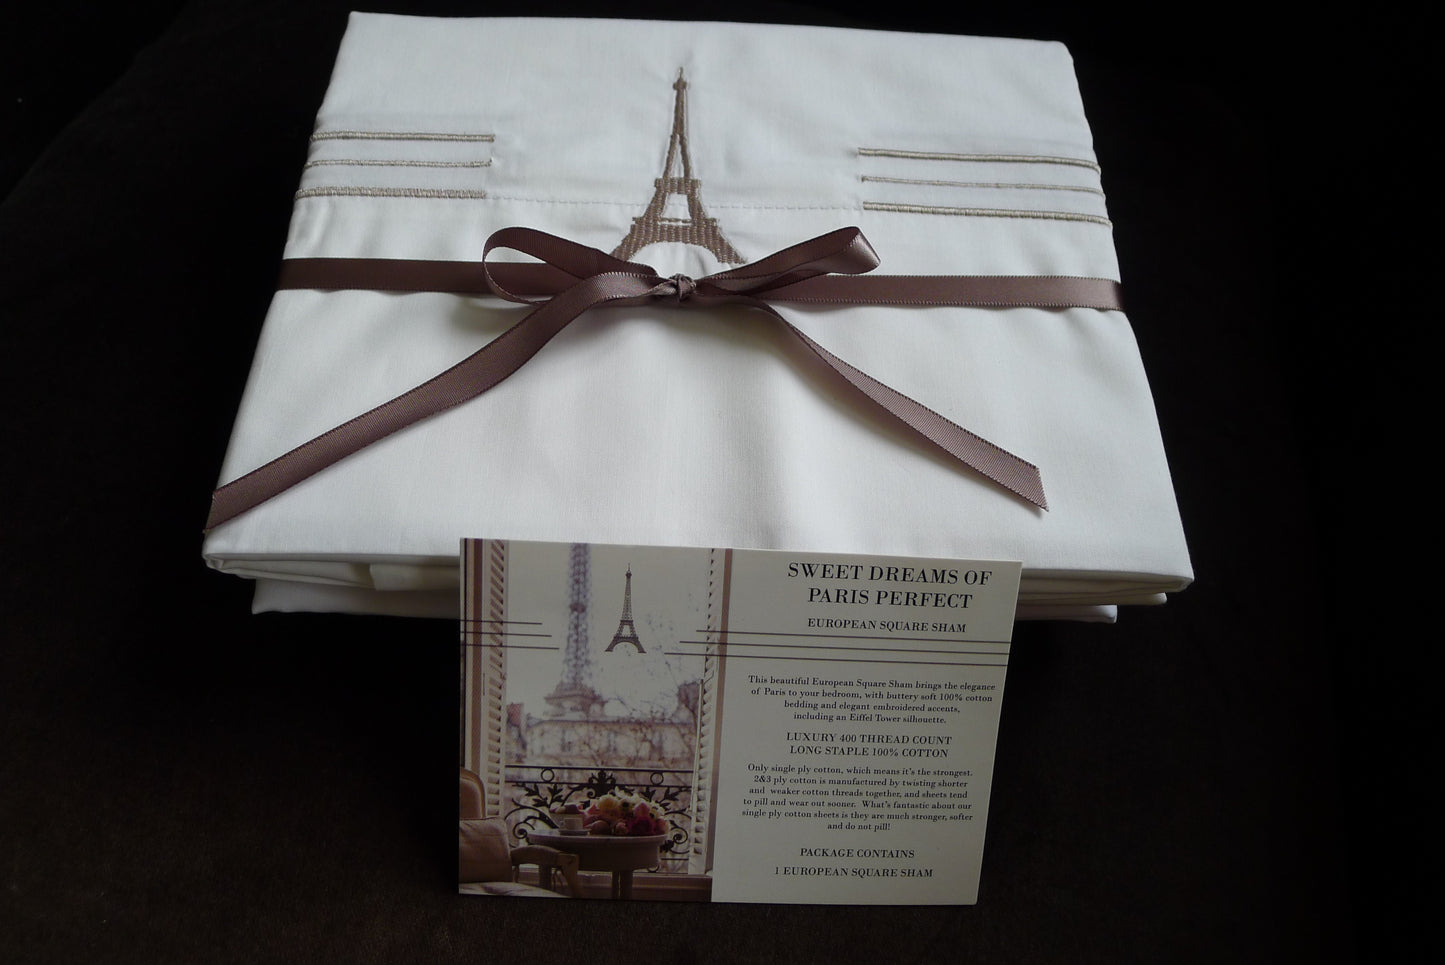 Eiffel Tower Luxury Square Throw Pillow Cover (1 pc)